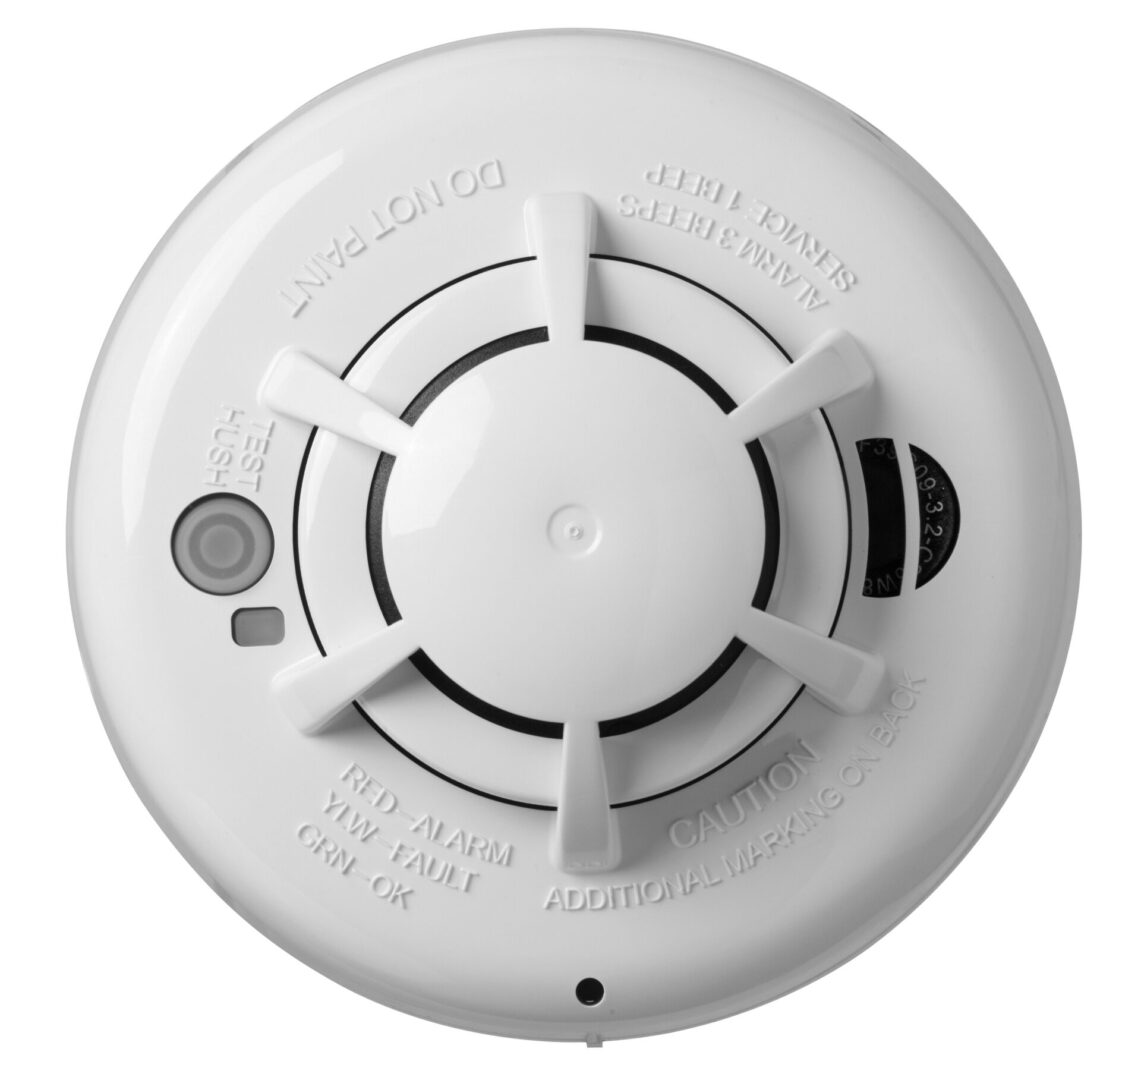 A smoke detector is shown with the front of it.